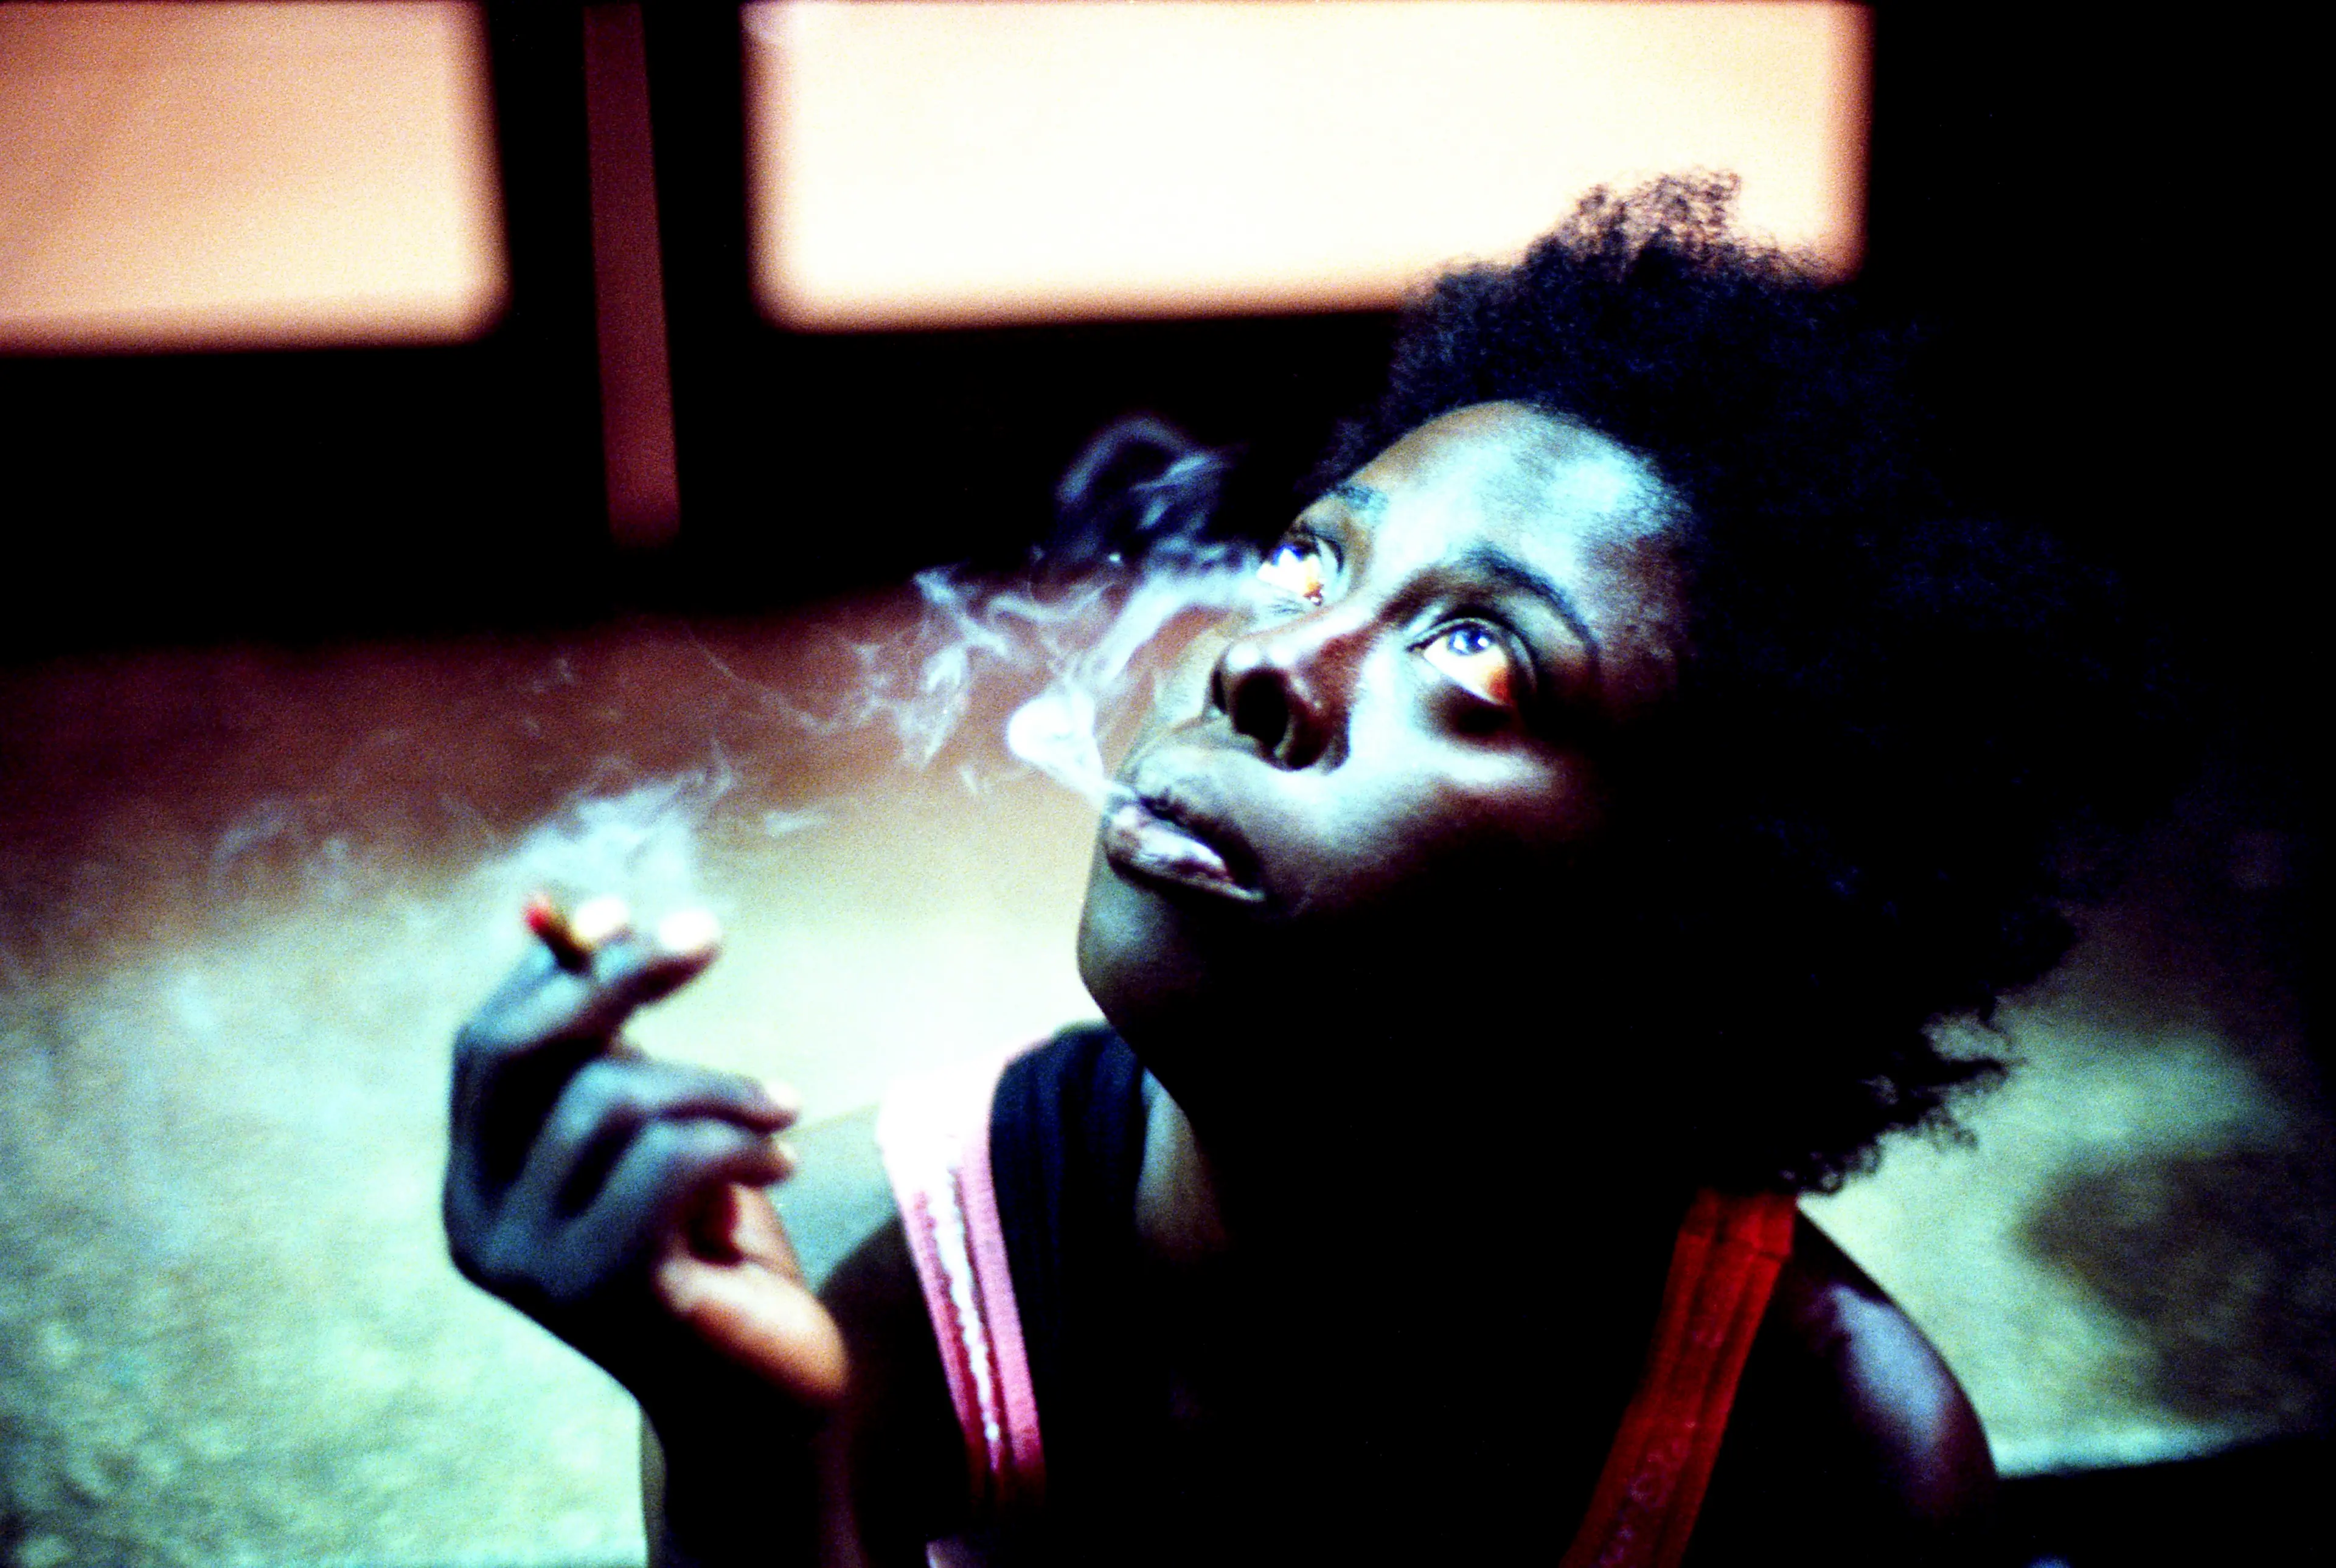 Photo of black woman with short hair in a dark surround, smoking, looking up towards light.